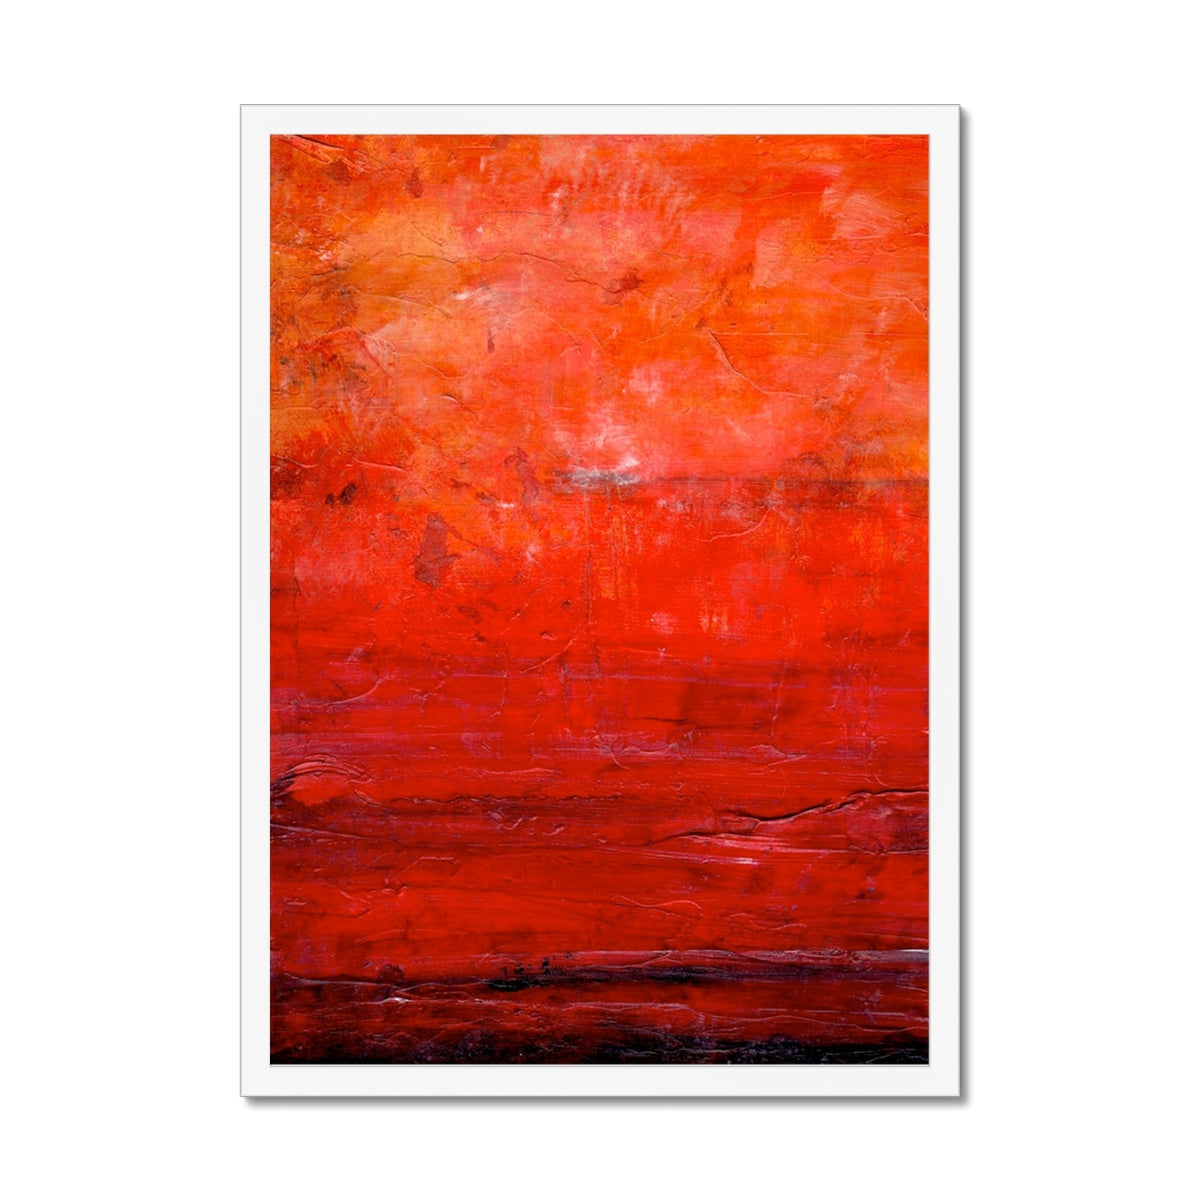 Abstract Summer Painting | Framed Prints From Scotland-Framed Prints-Abstract & Impressionistic Art Gallery-A2 Portrait-White Frame-Paintings, Prints, Homeware, Art Gifts From Scotland By Scottish Artist Kevin Hunter